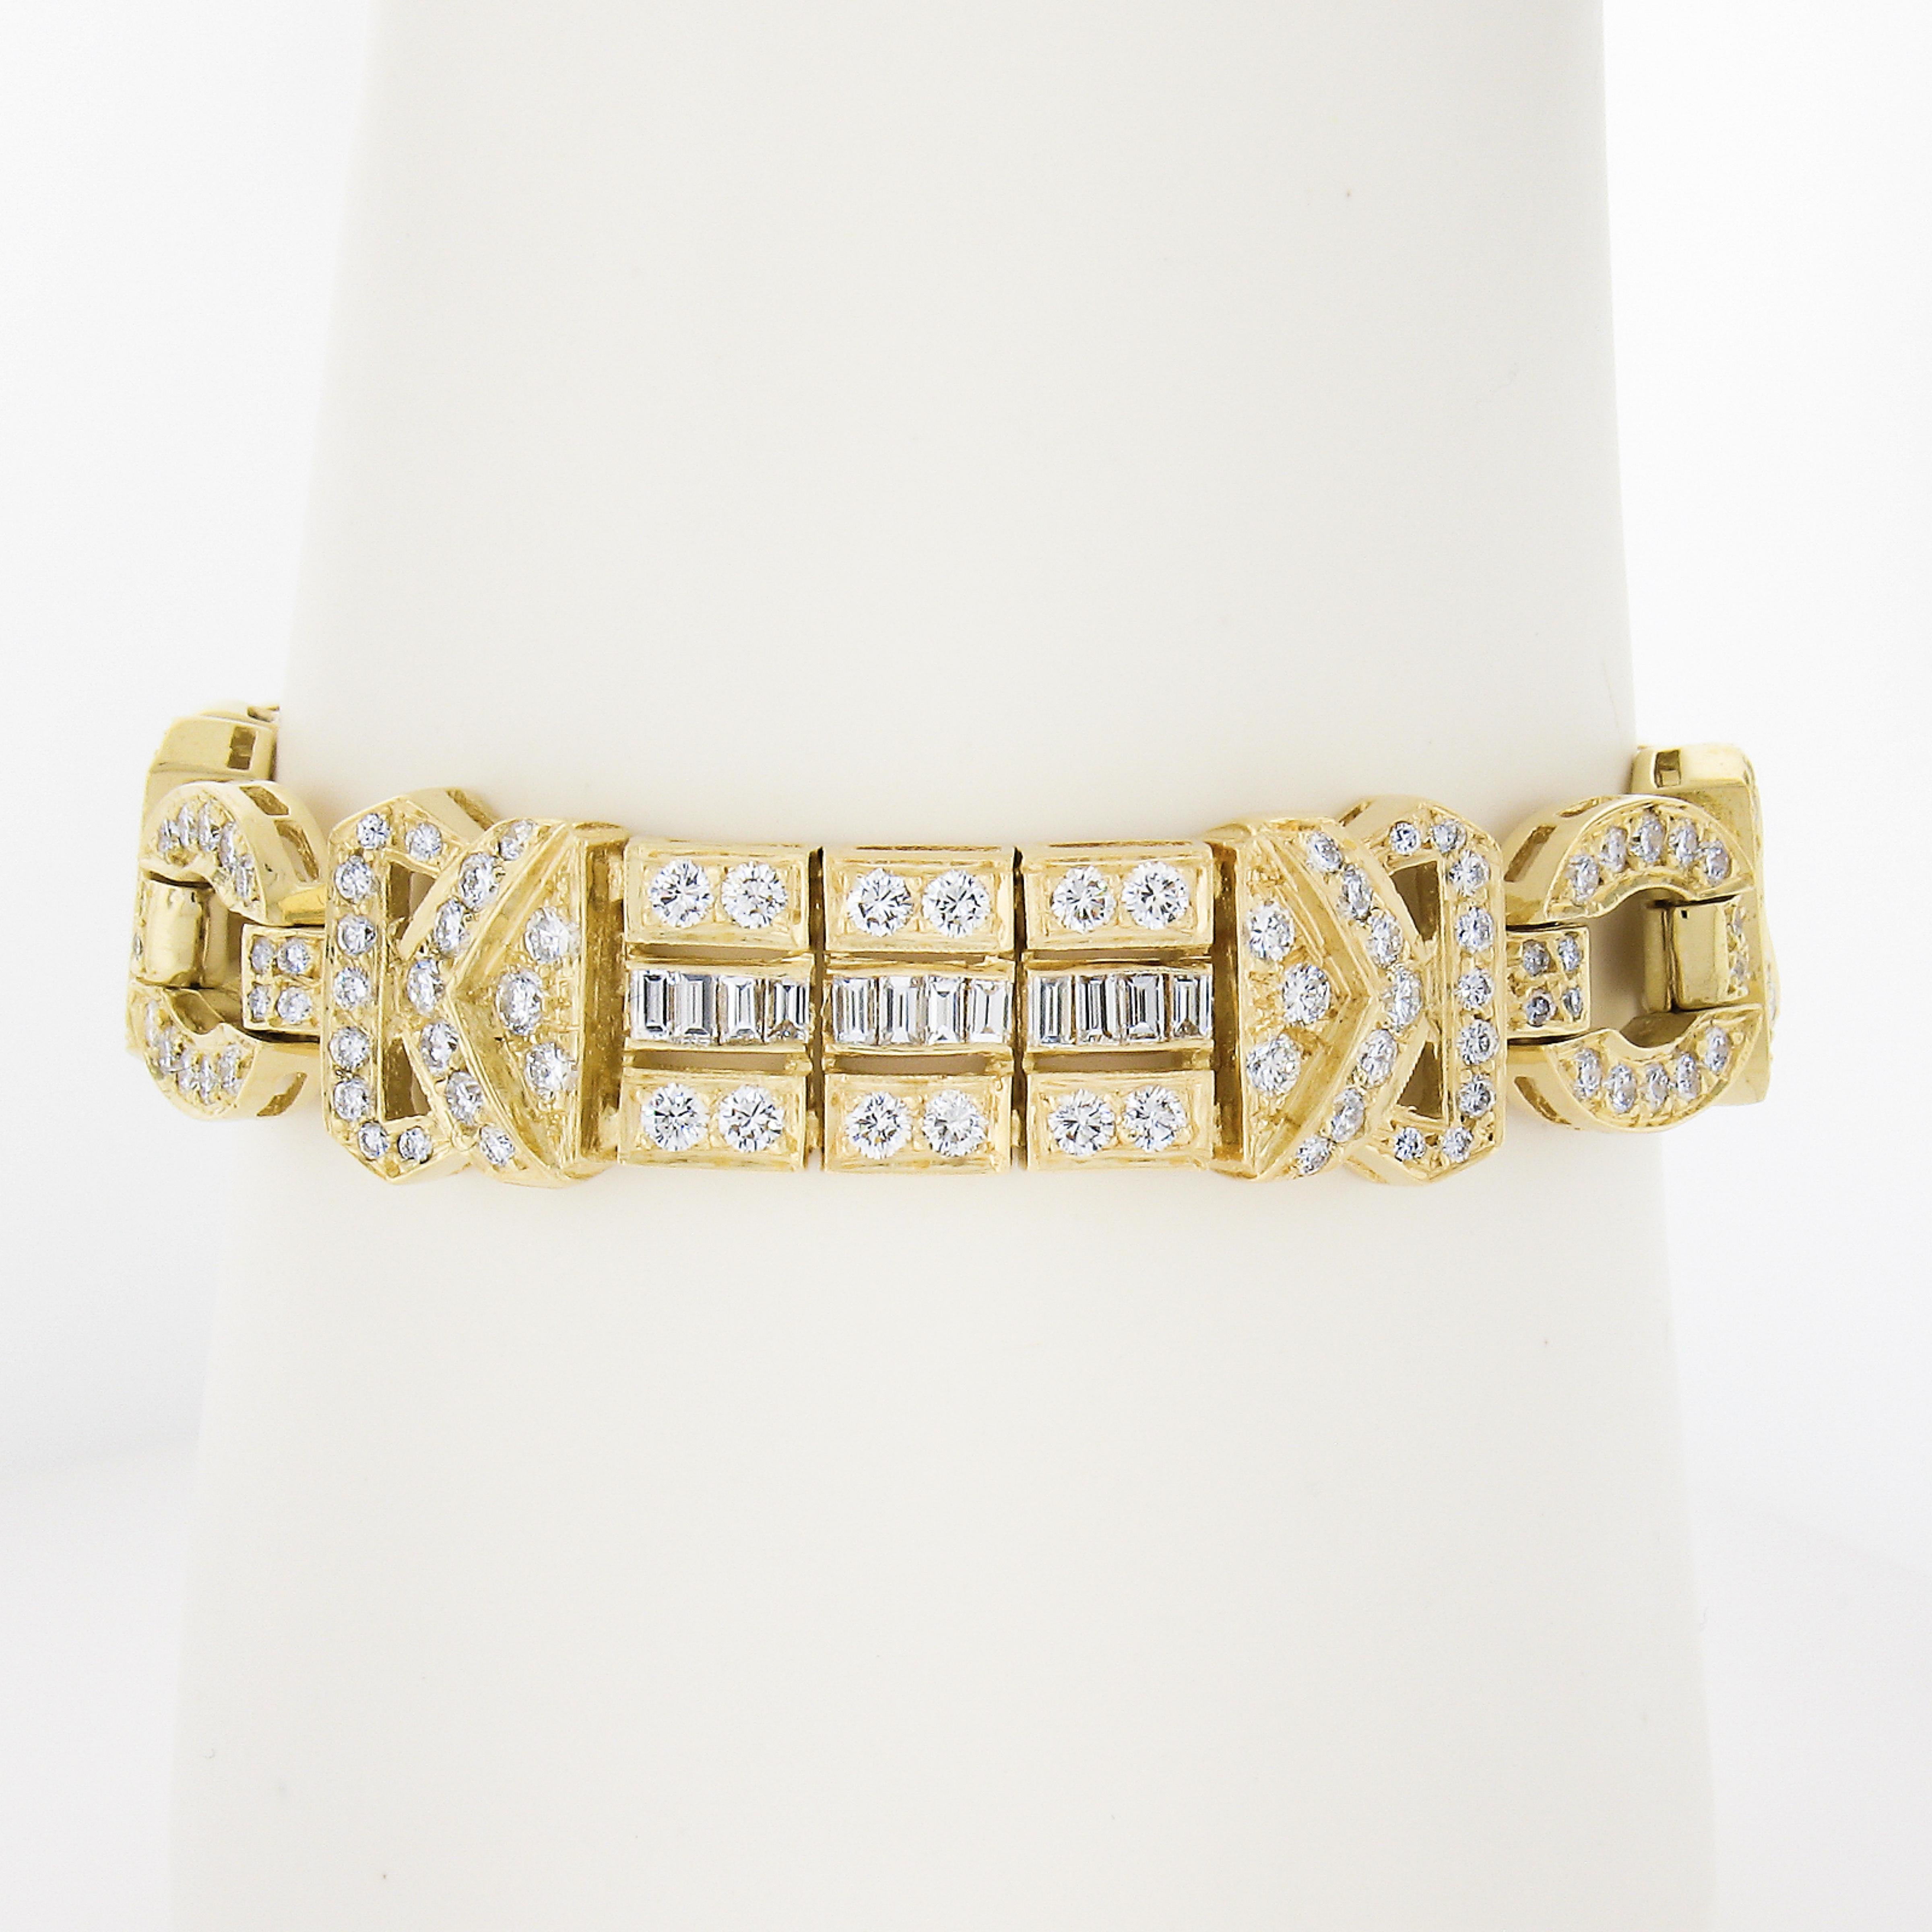 Absolutely magnificent fiery diamonds cover this solid gold bracelet. The baguette and round diamonds truly give off brilliance at any position and any movement. A truly elegant and imperial style and look. Enjoy!

--Stones:--
204 Natural Genuine